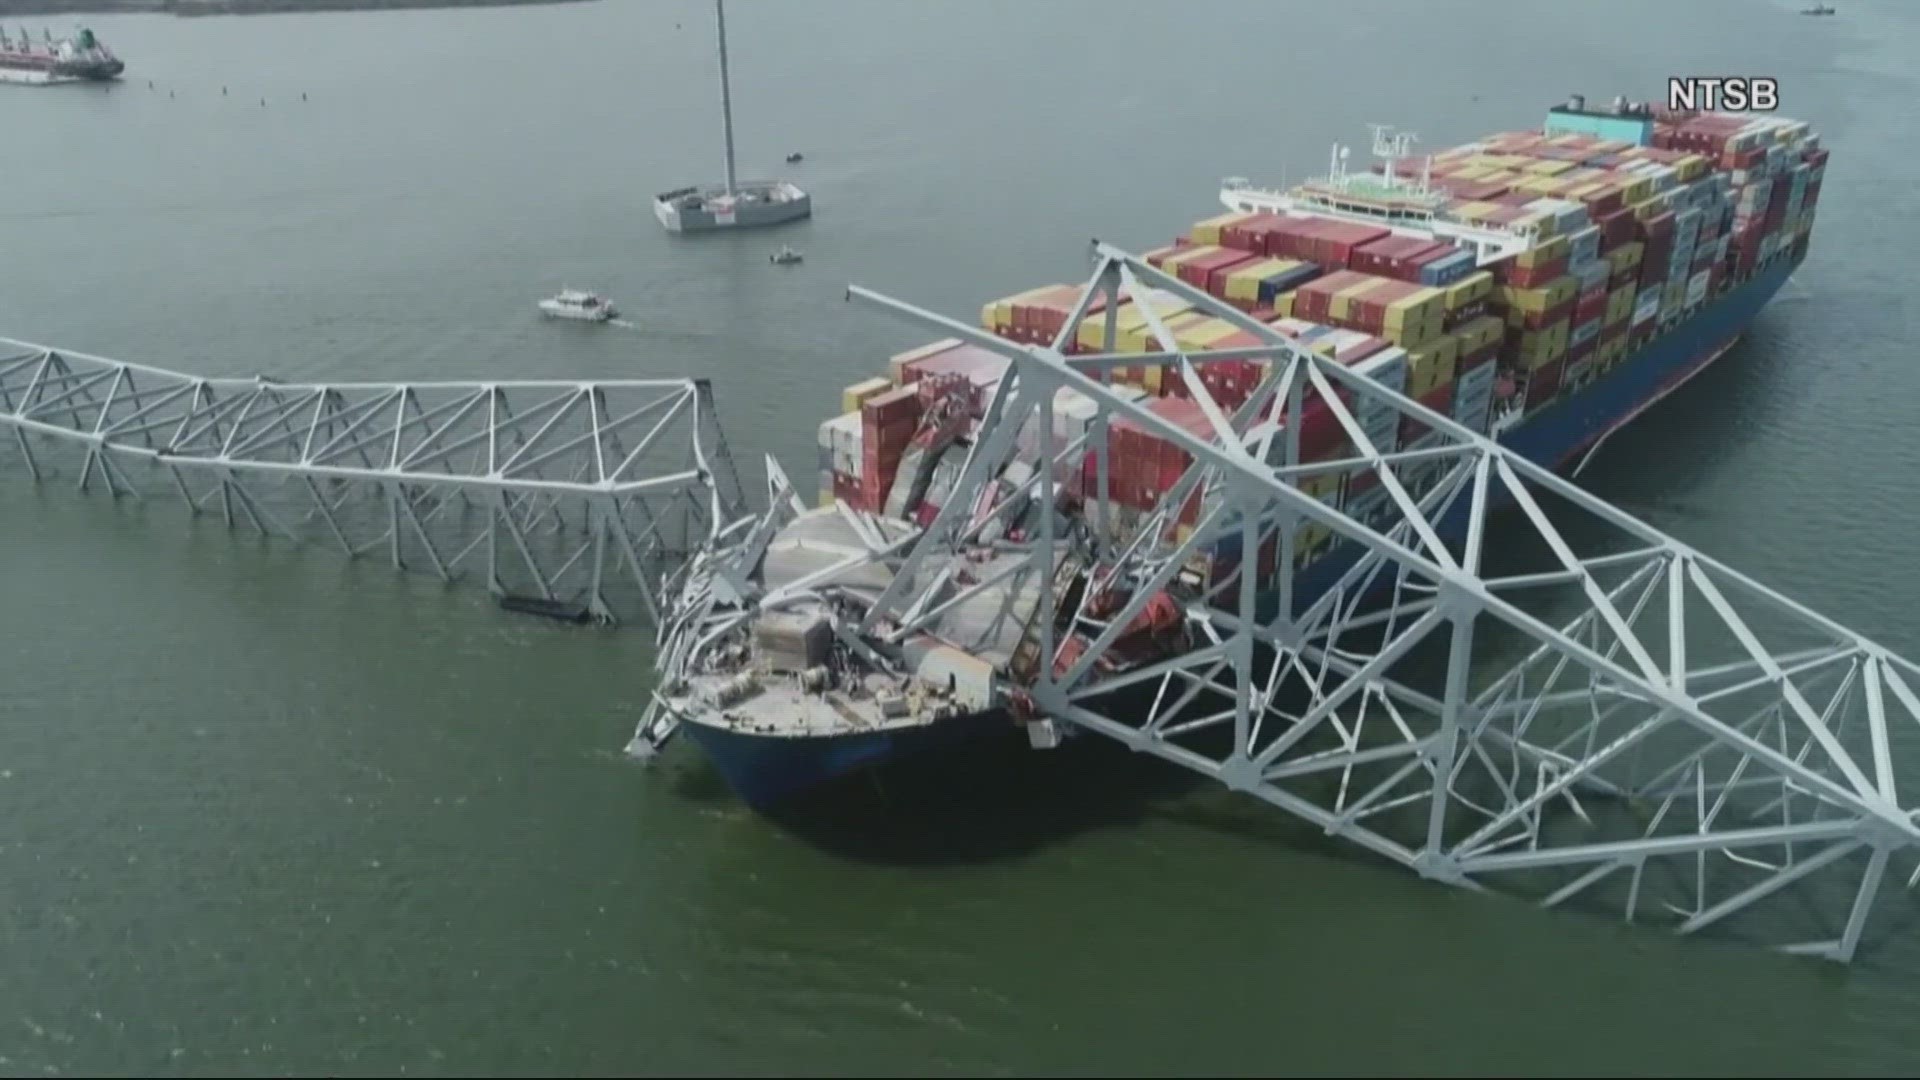 Two bodies have been recovered following the collapse of the Francis Scott Key Bridge in Baltimore. The bodies were found in a truck about 25 feet underwater.